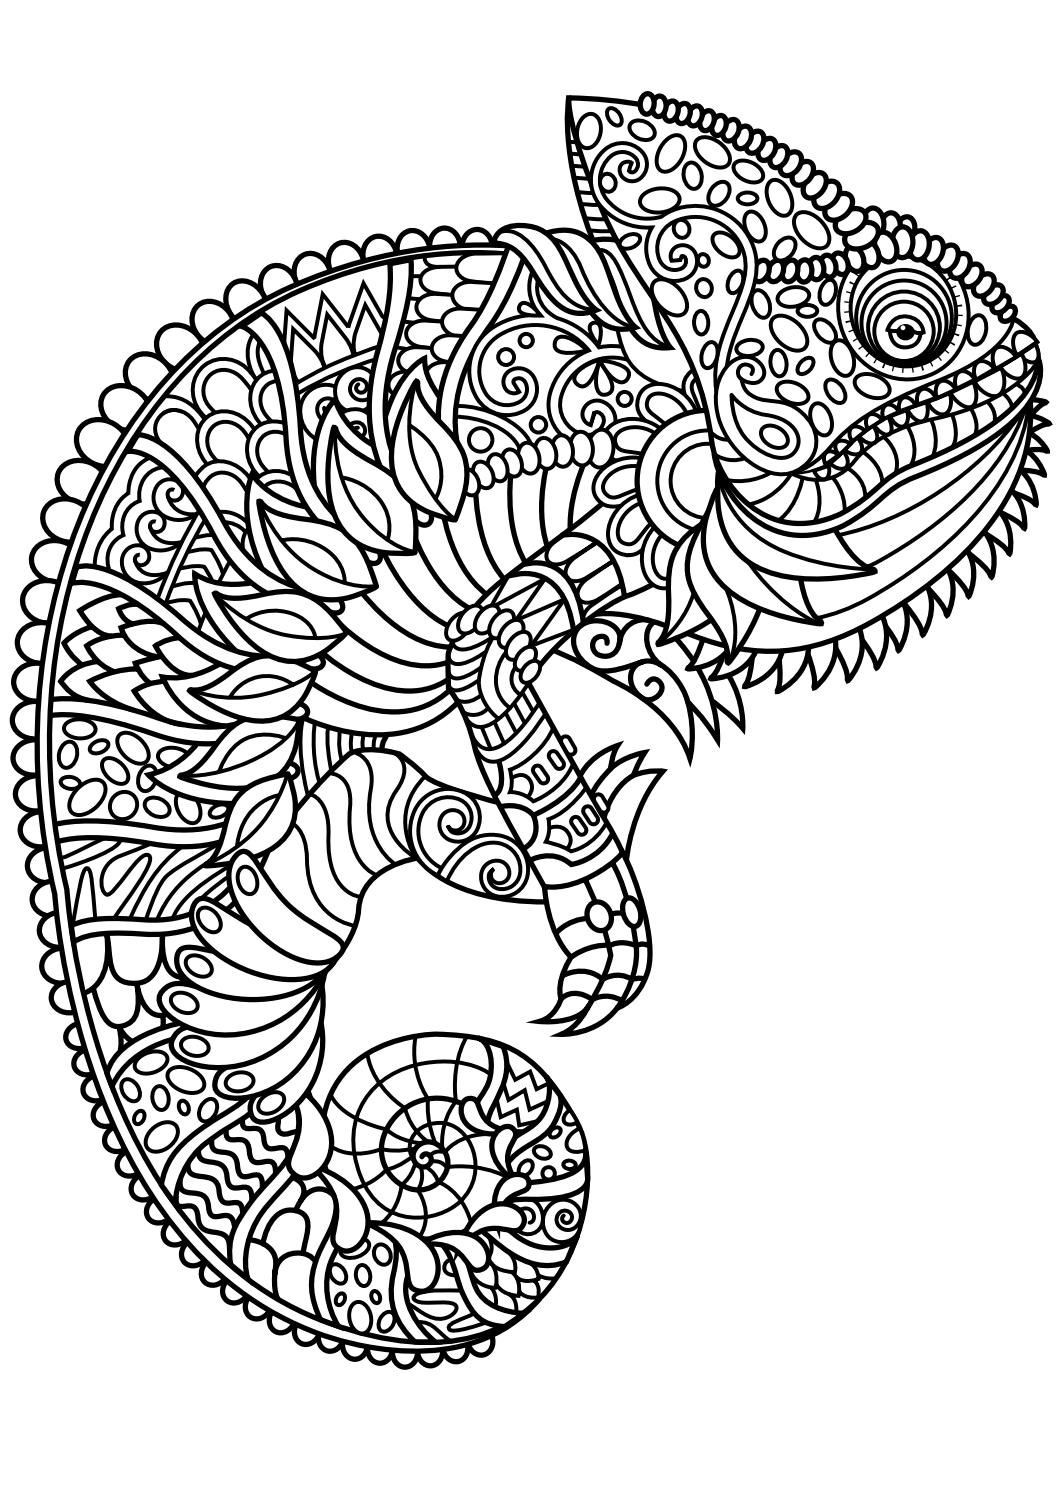 Free Adult Coloring Book Pdf
 Animal coloring pages pdf